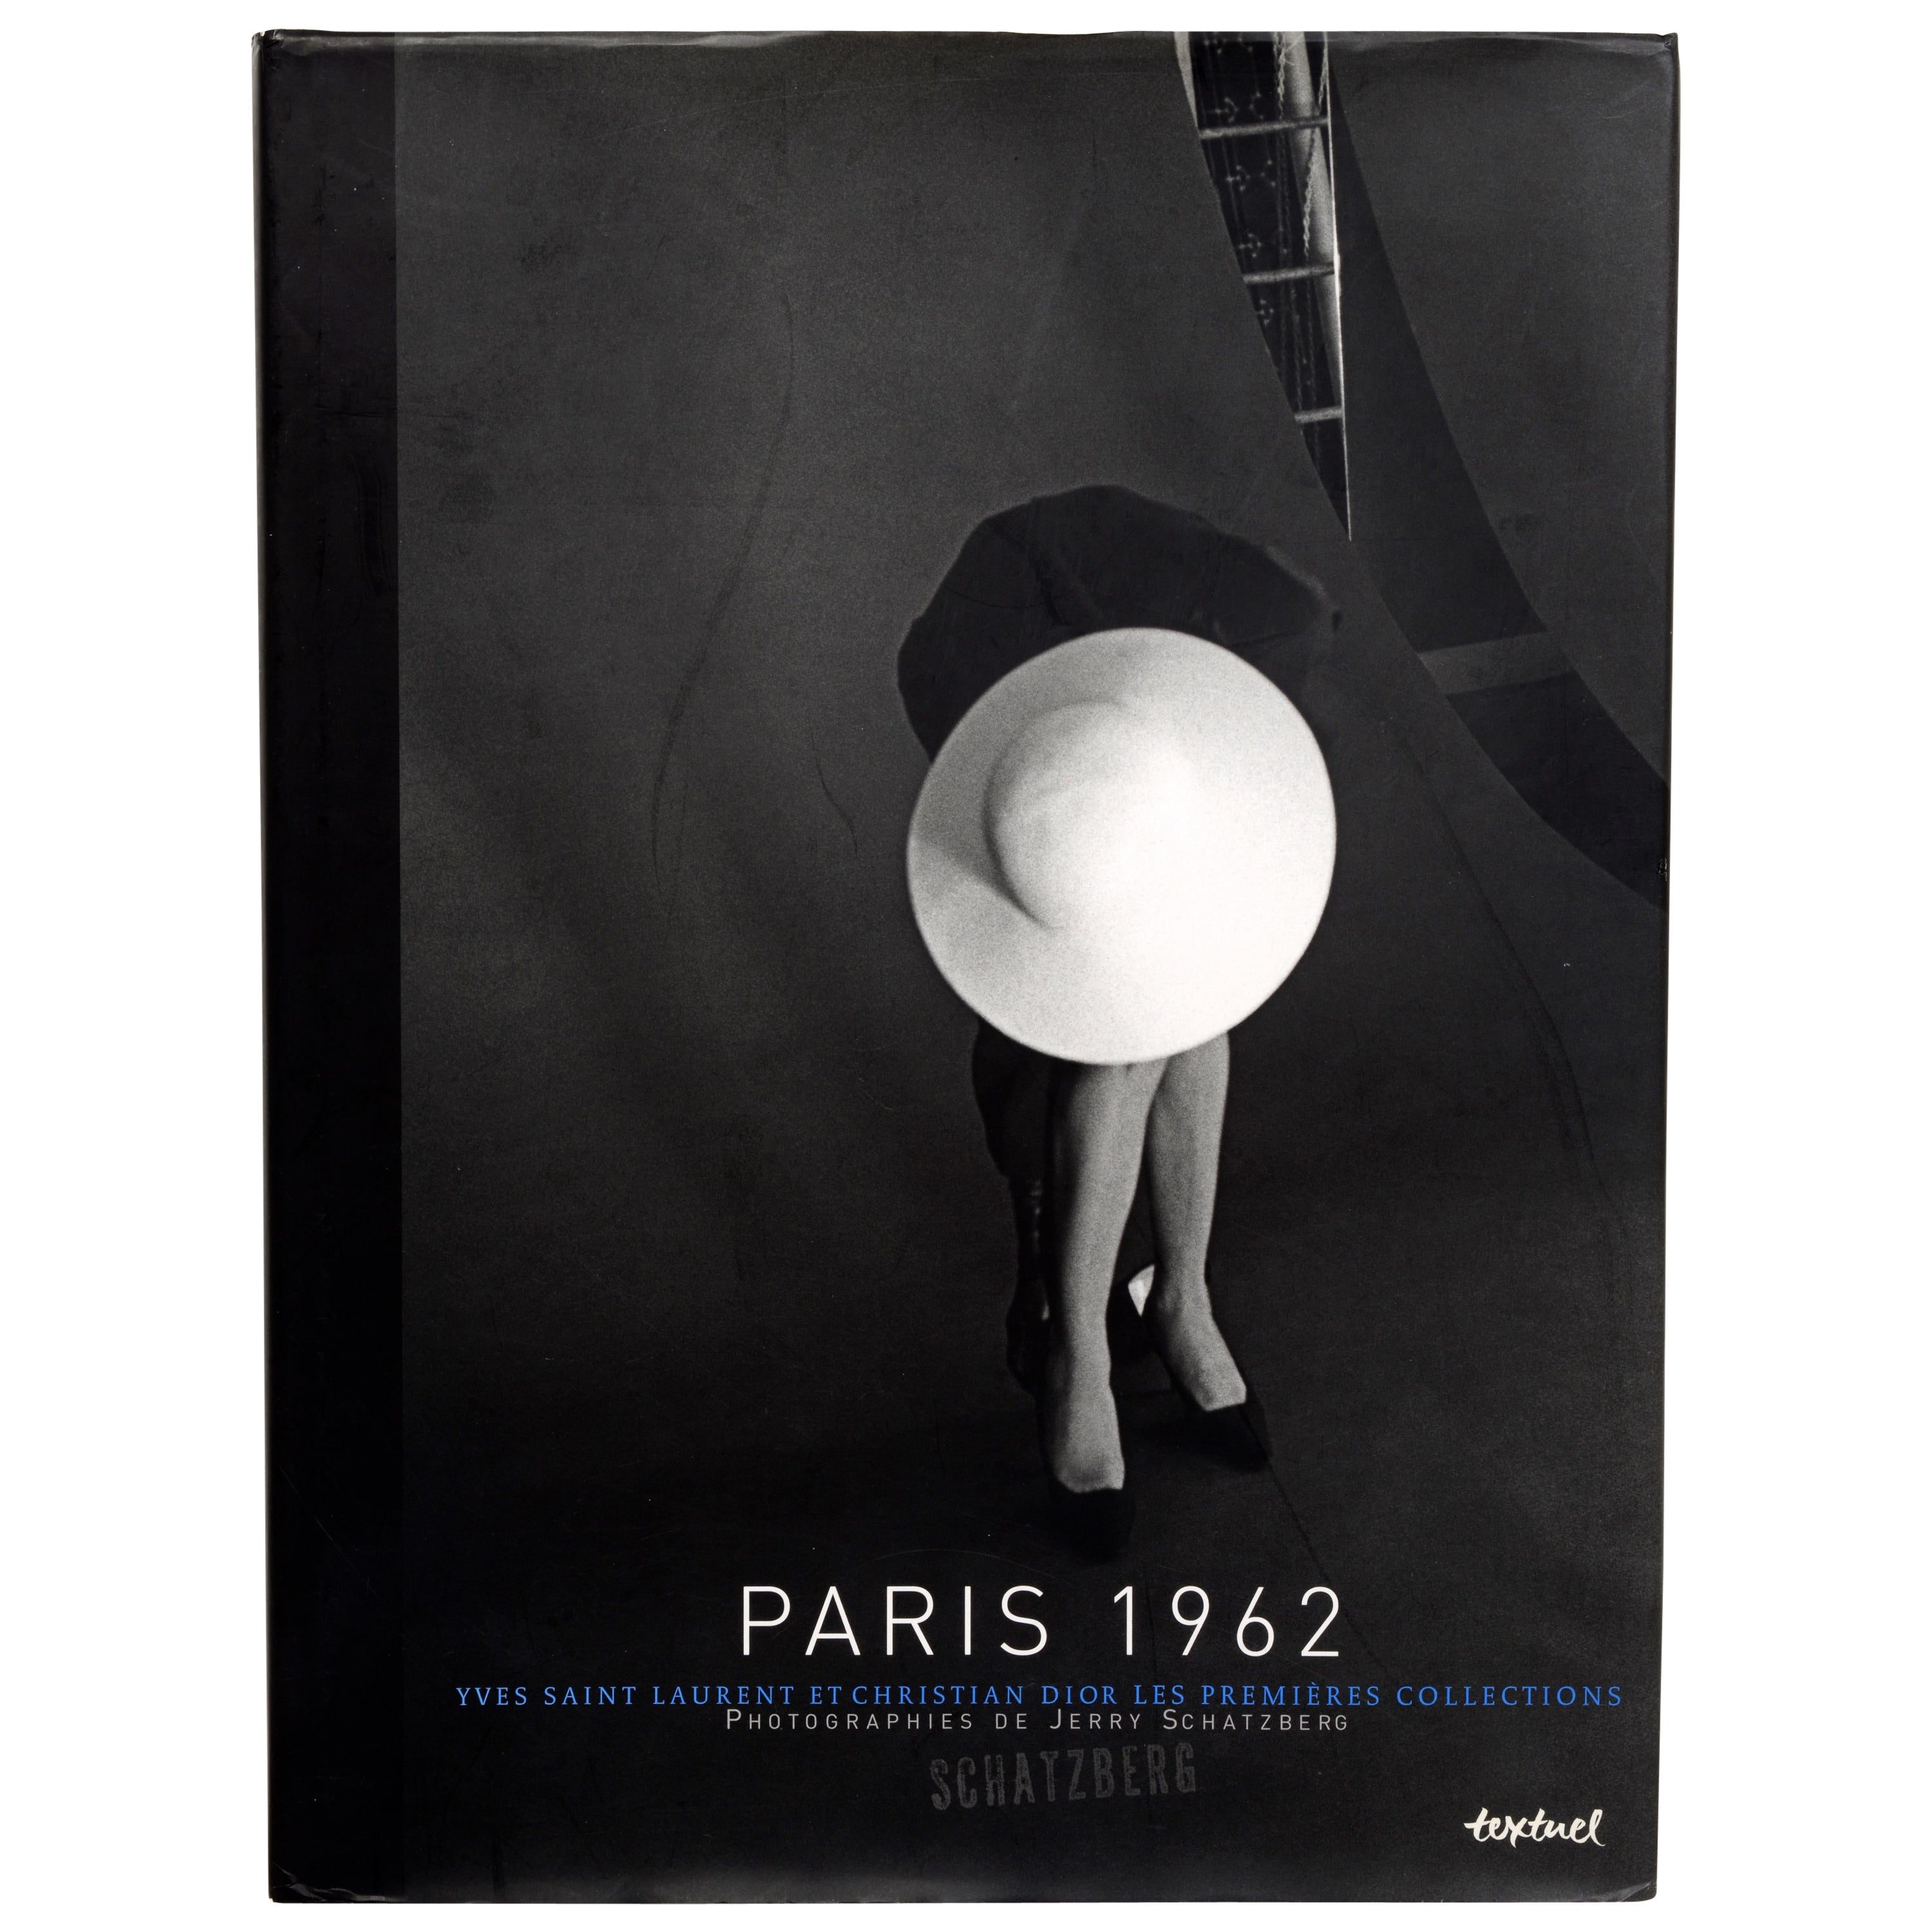 Paris 1962, Yves Saint Laurent & Christian Dior, the Early Collections, Signed